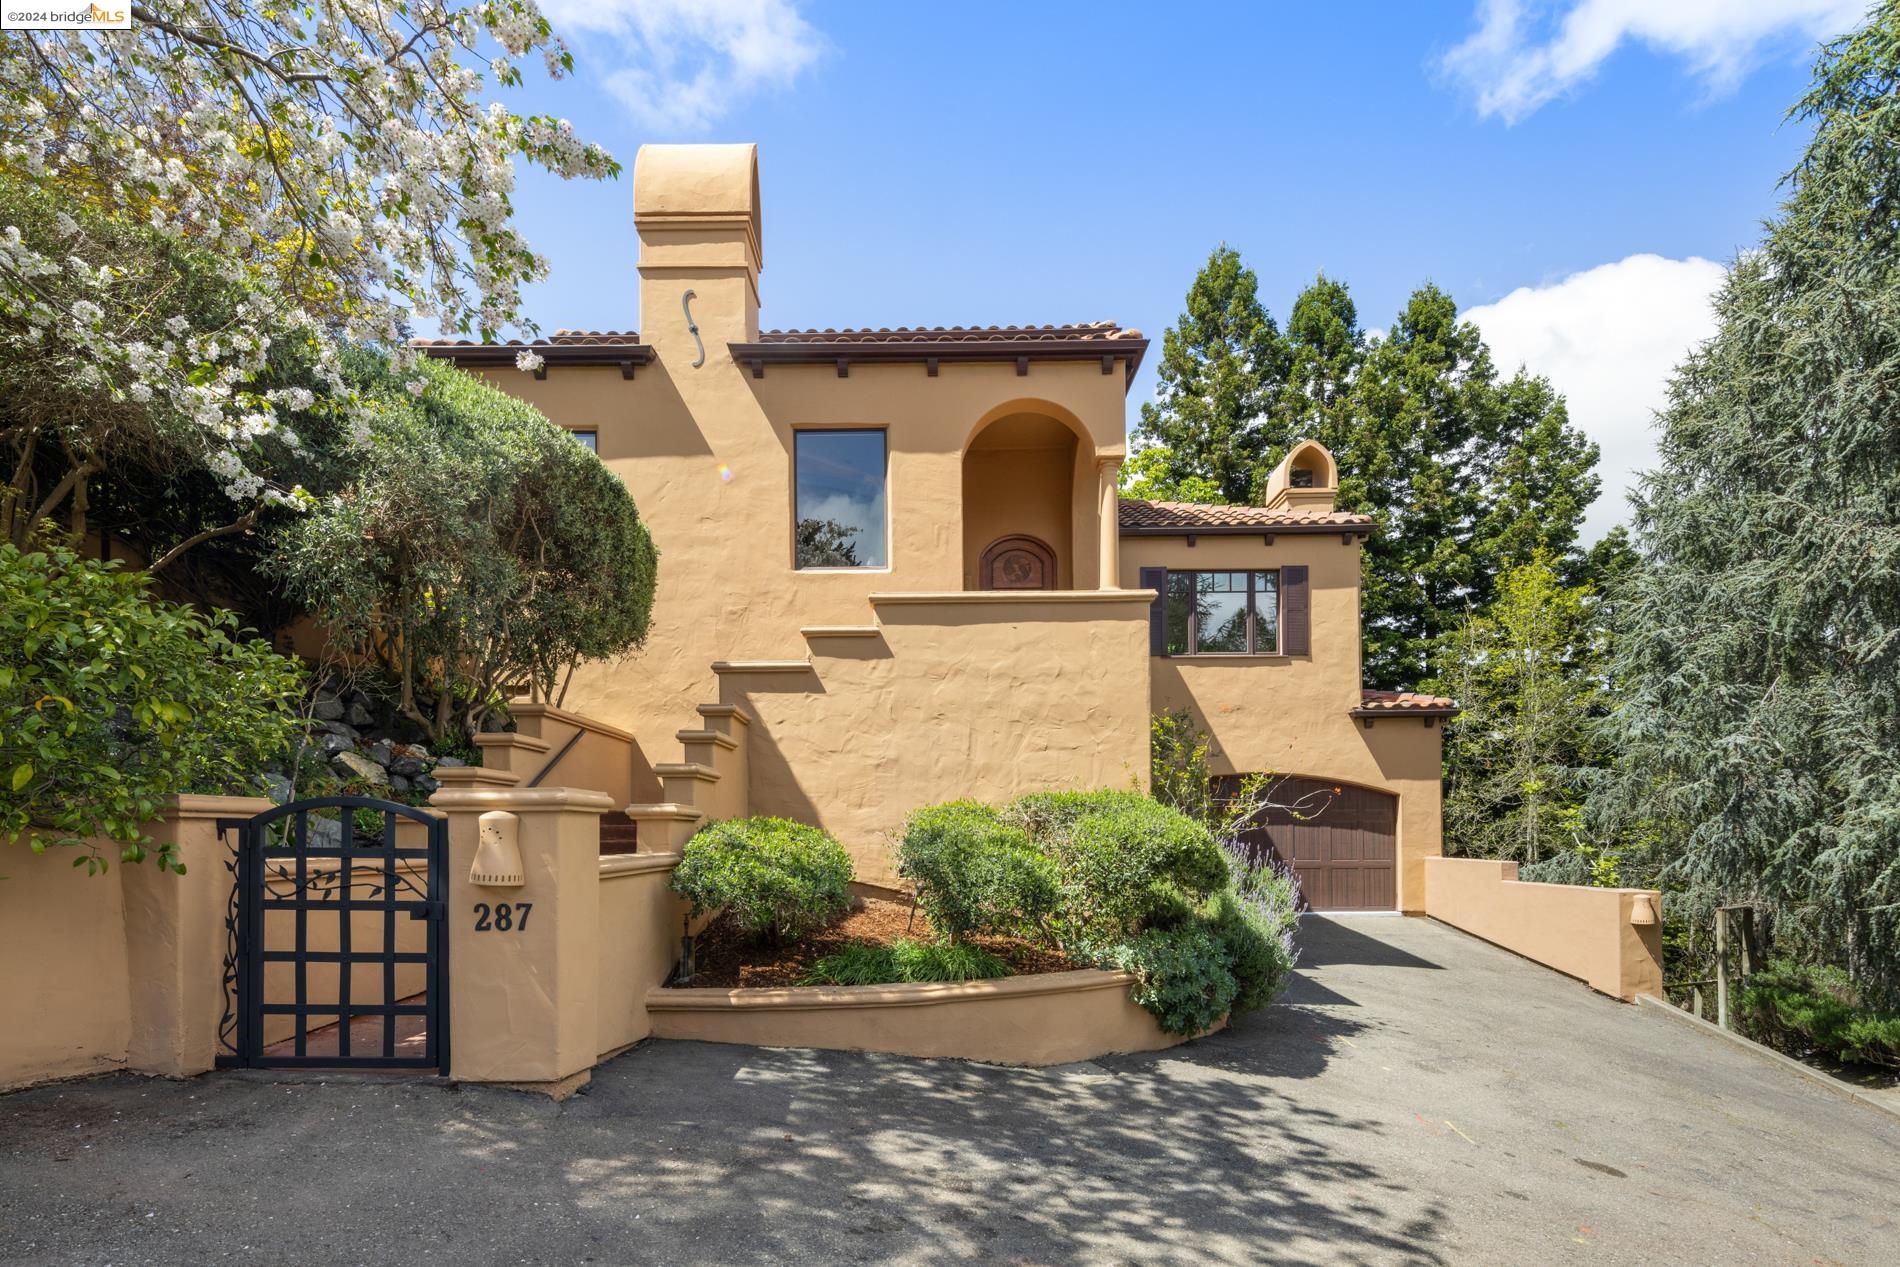 This distinctive Spanish-inspired home emanates remarkable custom craftsmanship. Its grand scale is immediately apparent upon entry, with soaring ceilings, a dramatic staircase, and clerestory windows that flood the space with natural light. The living room features a vaulted ceiling adorned with rustic wood beams and a stylish tiled fireplace. Adjacent, the kitchen boasts granite countertops and a Bay window offering tranquil garden views. On the main level are two bedrooms and a bathroom. A spacious family room offers a separate entertainment area. The upstairs primary suite includes a charming bonus room with a built-in desk and a tiled split bathroom. An additional ensuite bedroom and a laundry room complete the upper level. The expansive lot enveloped in lush landscaping provides a sense of peaceful seclusion. Separate outdoor areas provide excellent entertaining flow as well as space for relaxation and al fresco dining. Downstairs, a two-car garage and a versatile bonus room with bath offer many possibilities, whether it be a home office, gym, or creative space. Transportation options include a nearby BART station, bus lines and easy access to Hwy 13. The local Village Market, Rockridge, Piedmont Avenue and Montclair districts provide many shopping and dining options.